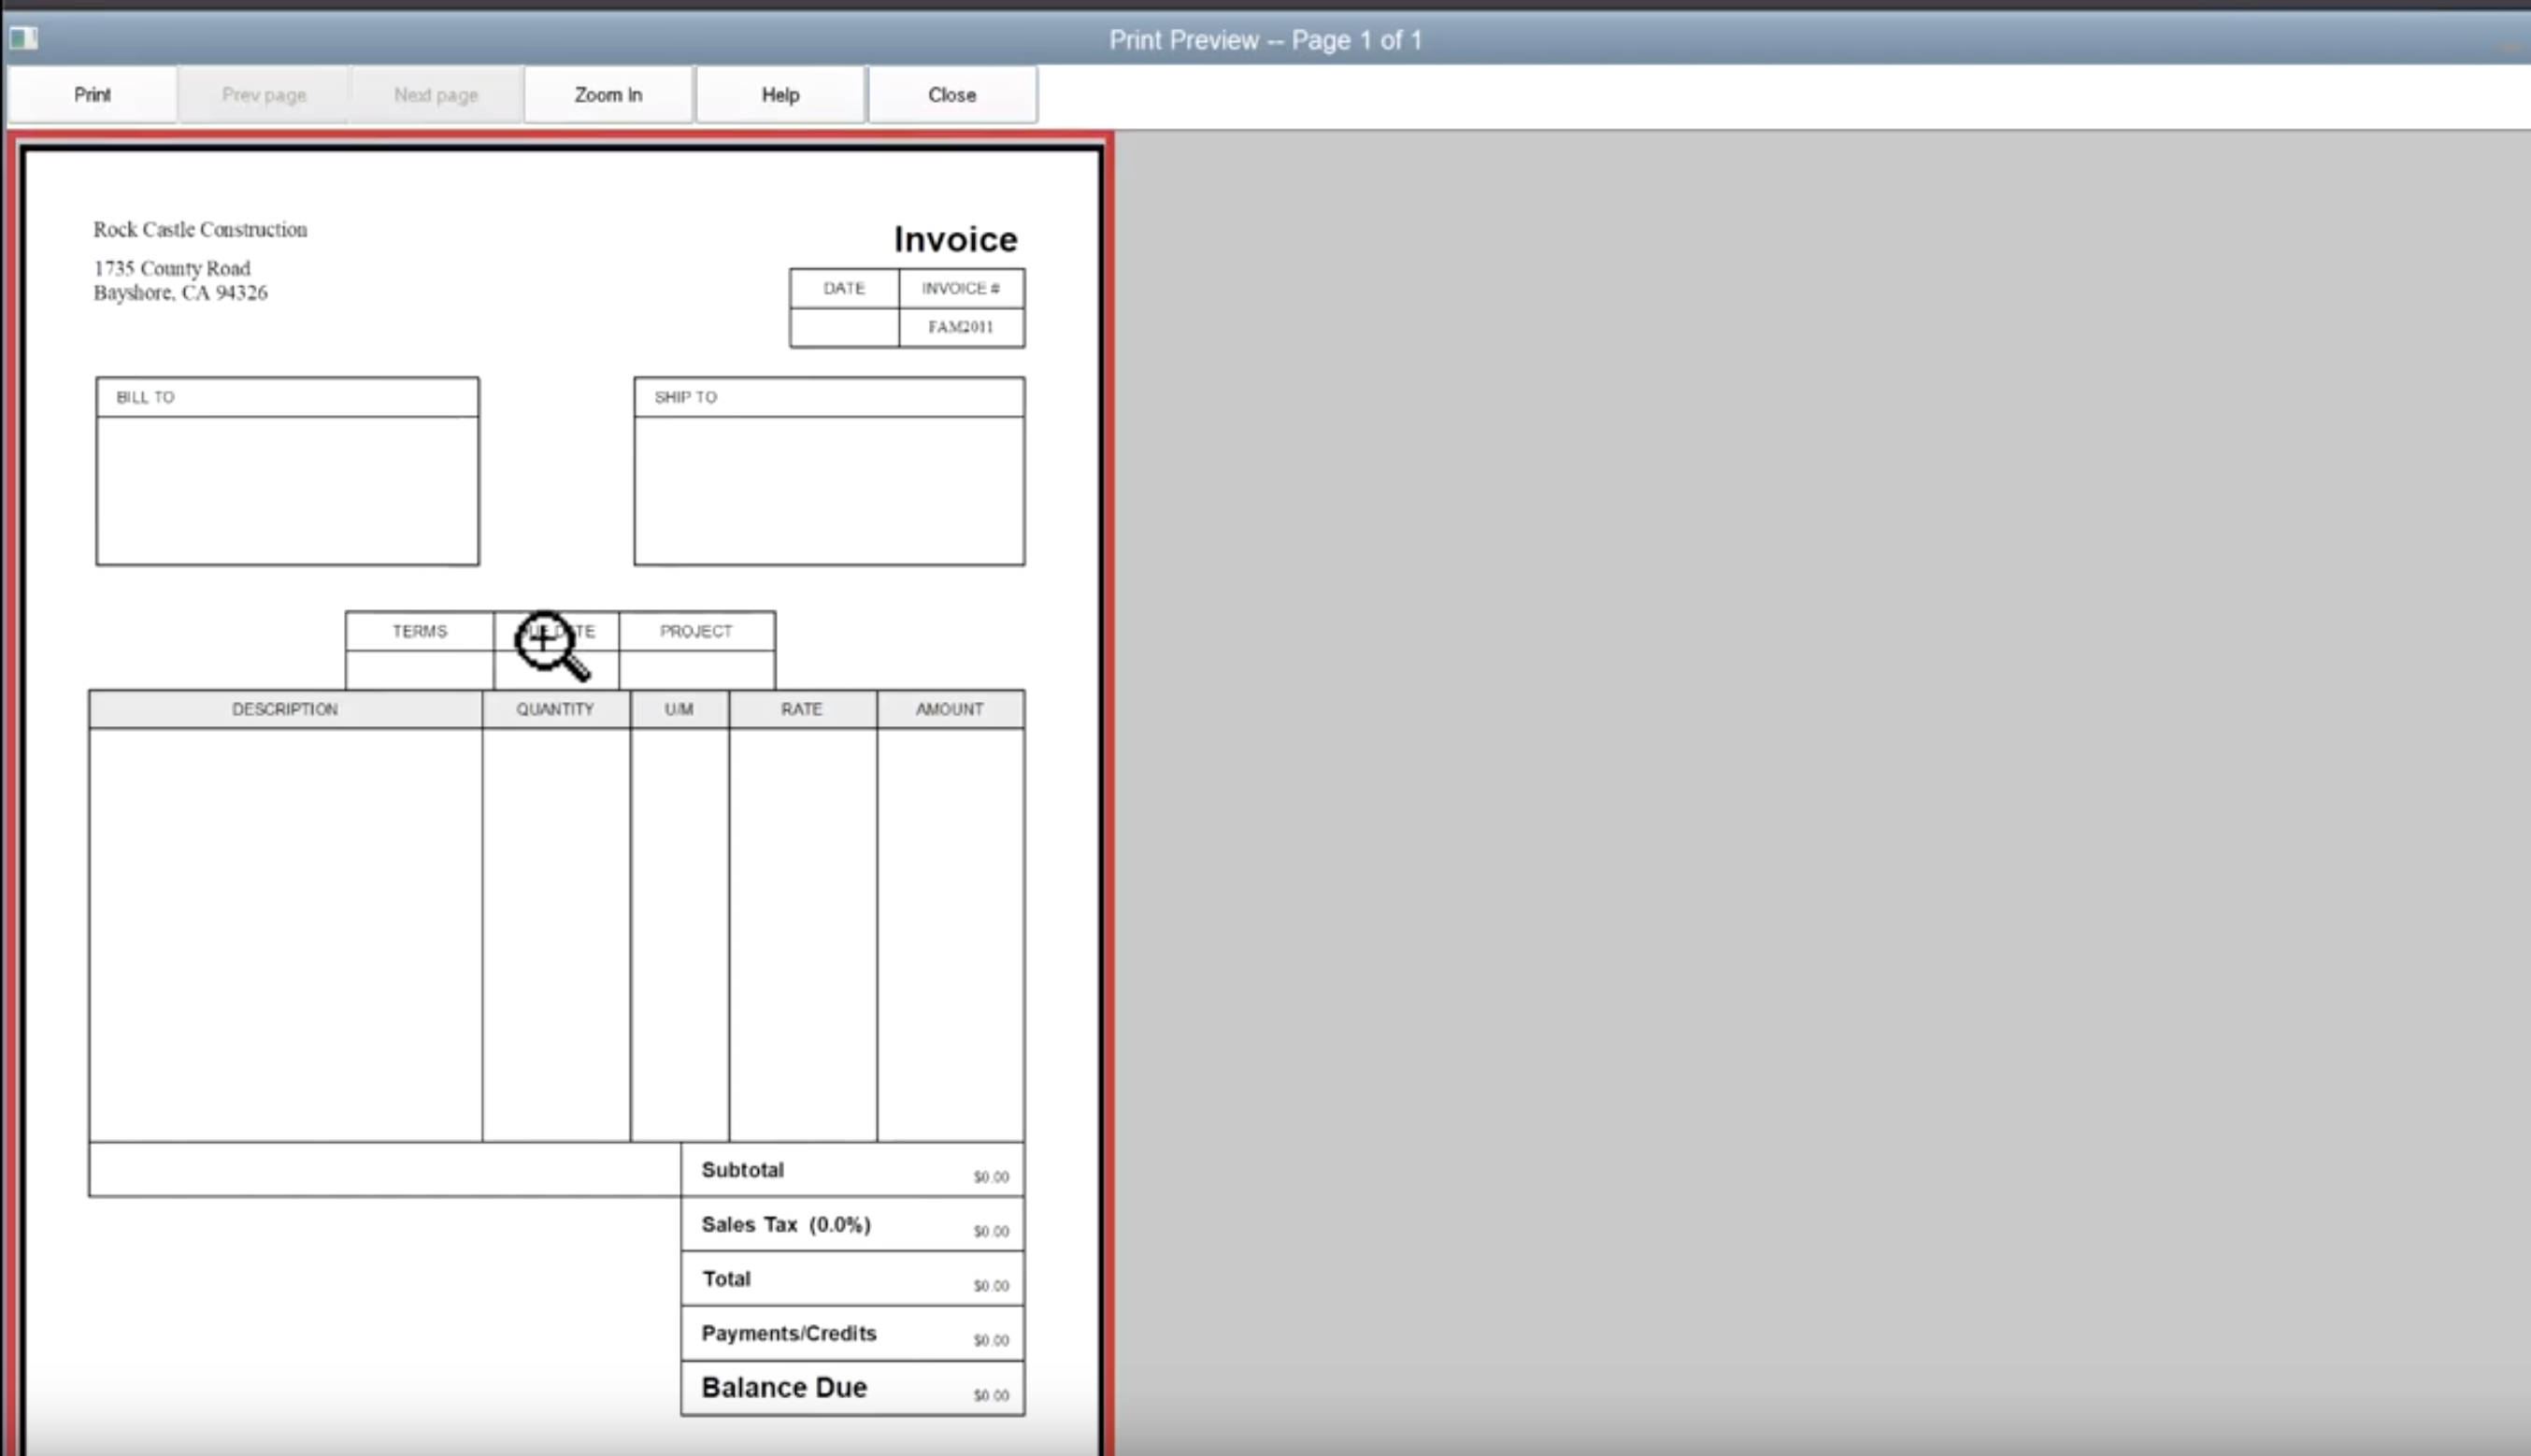 How to Edit an Invoice Template in QuickBooks - Gentle Frog Throughout How To Edit Quickbooks Invoice Template